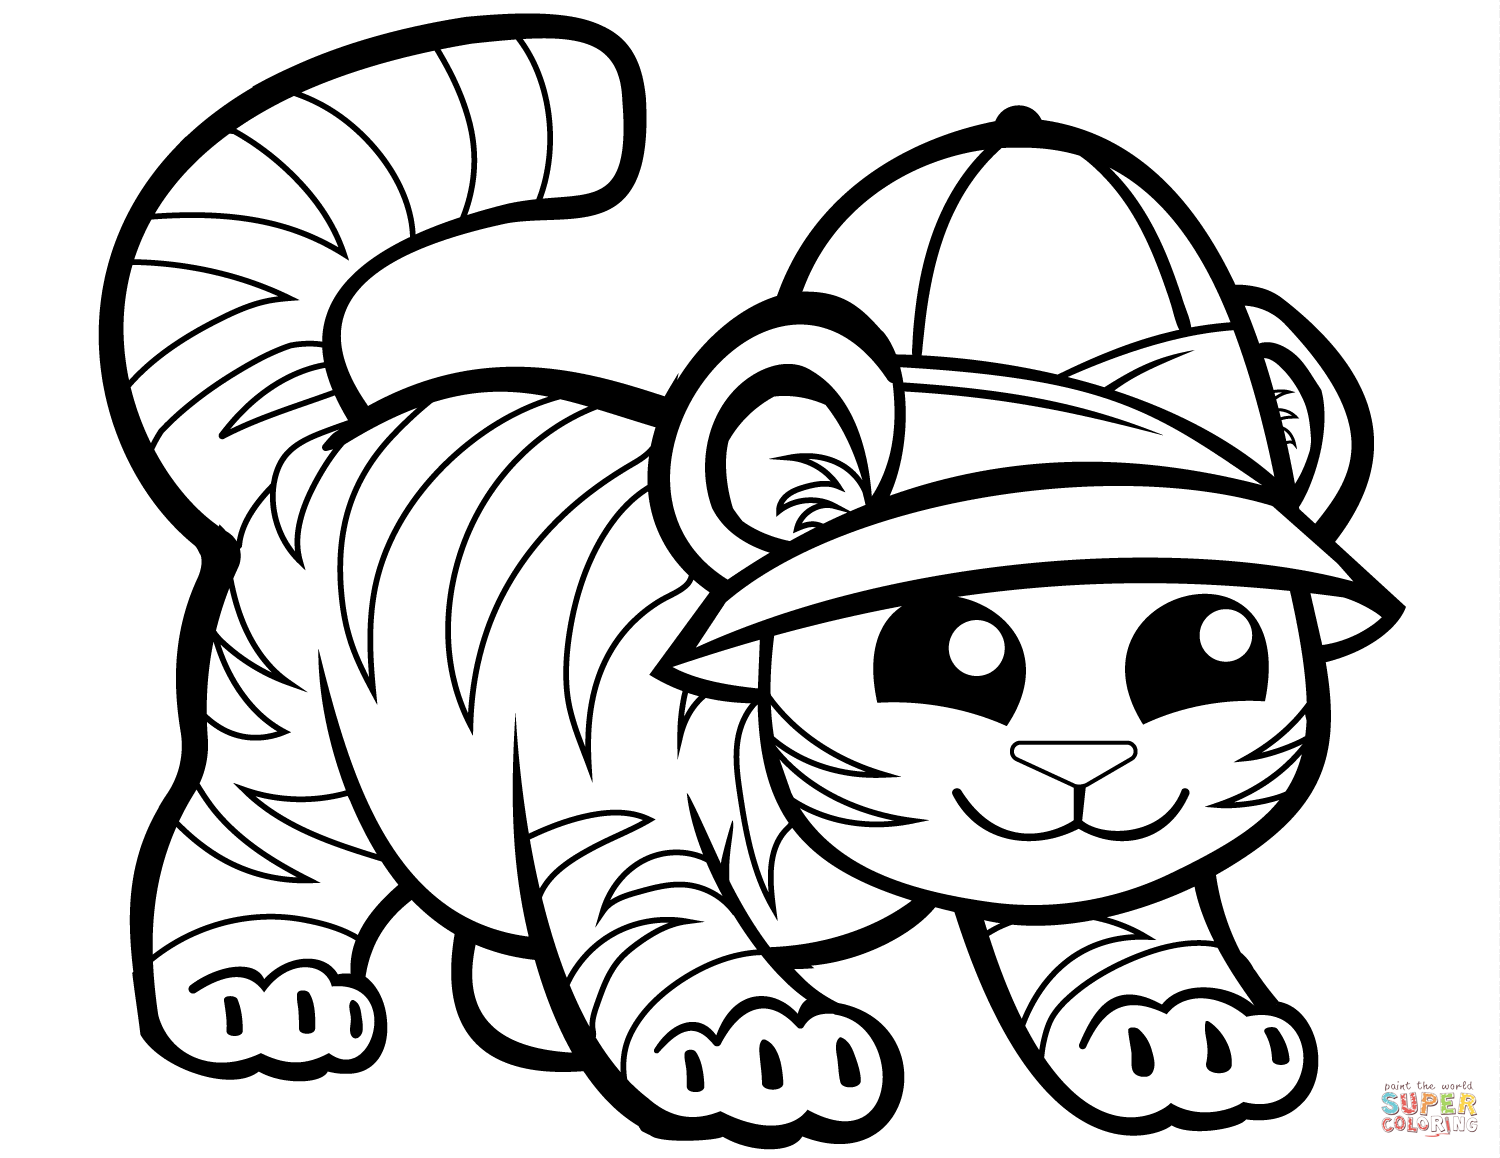 Cute Tiger in Cap coloring page | Free Printable Coloring Pages